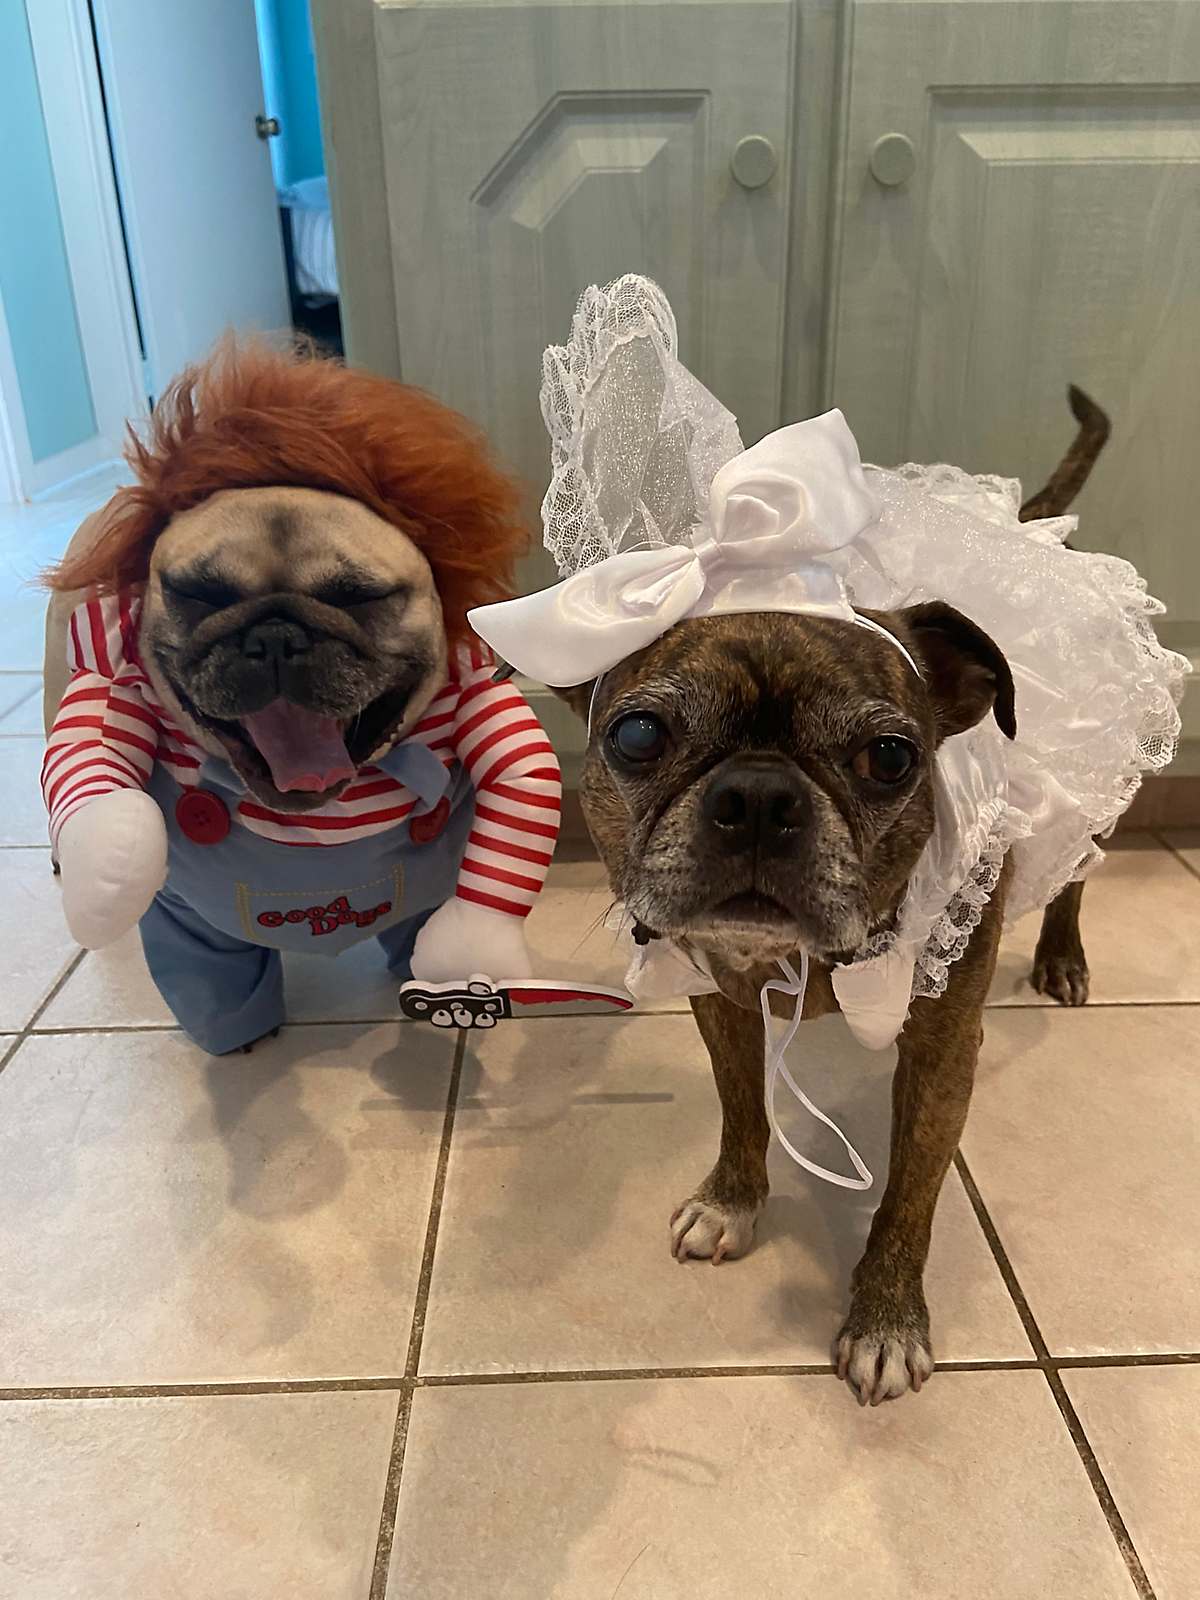 French bulldog and Boston terrier/half pug mix dressed in pet costumes as Chucky and Tiffany 